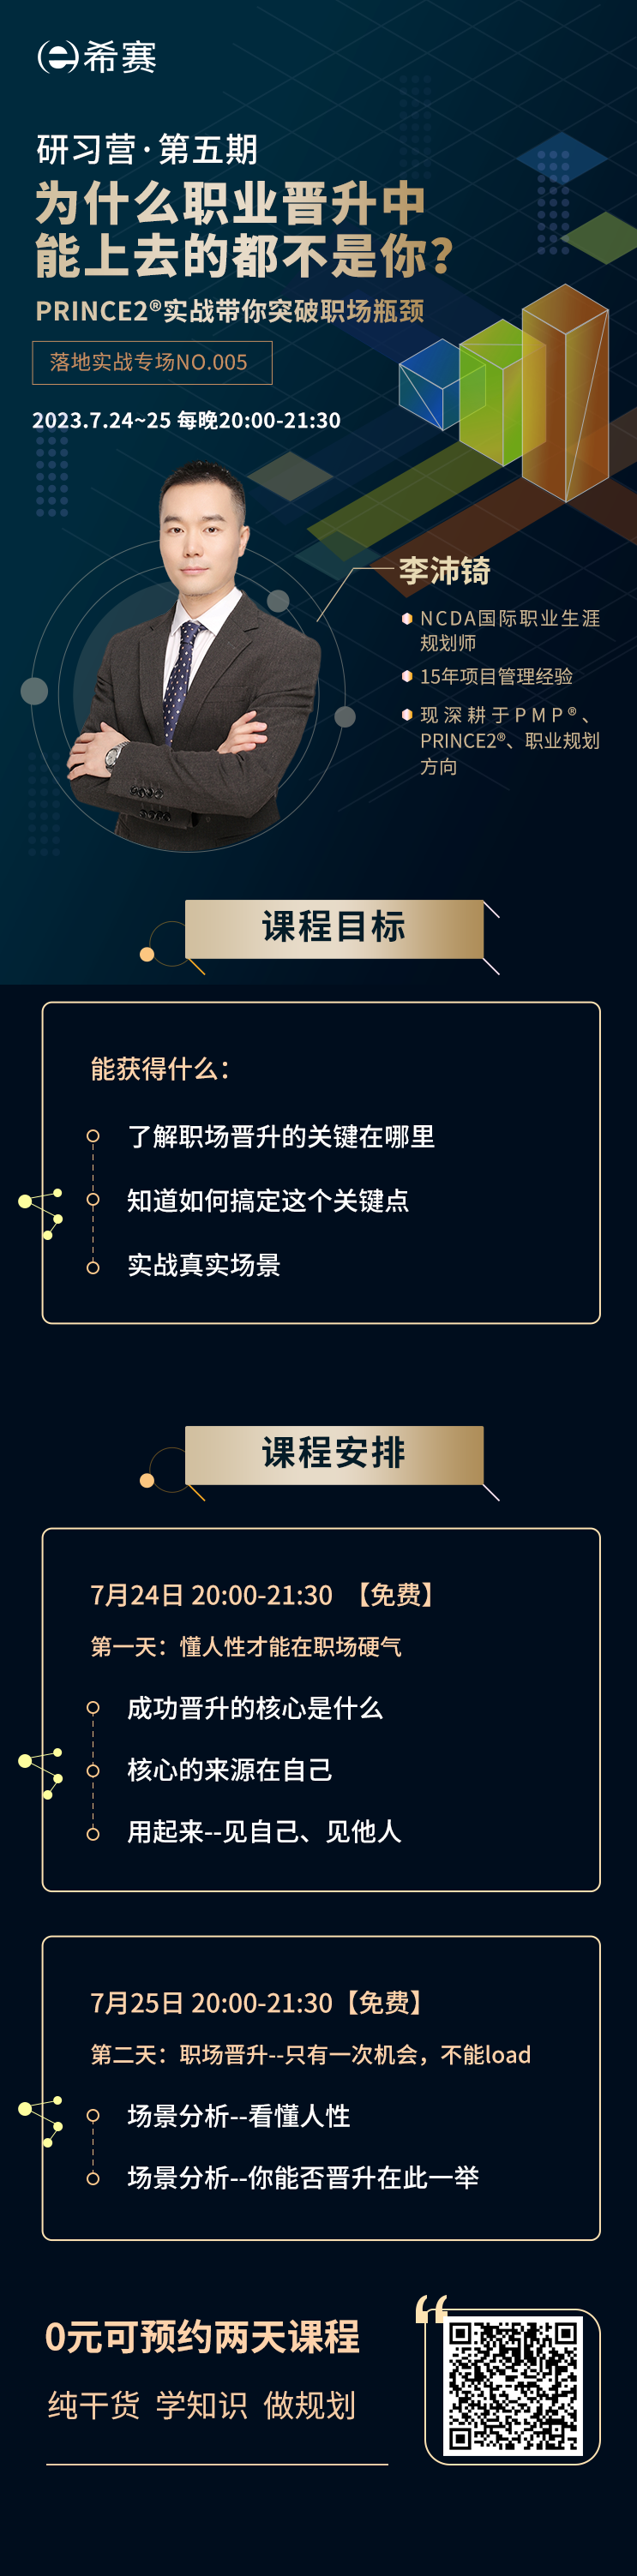 NPDP研习营海报1.png